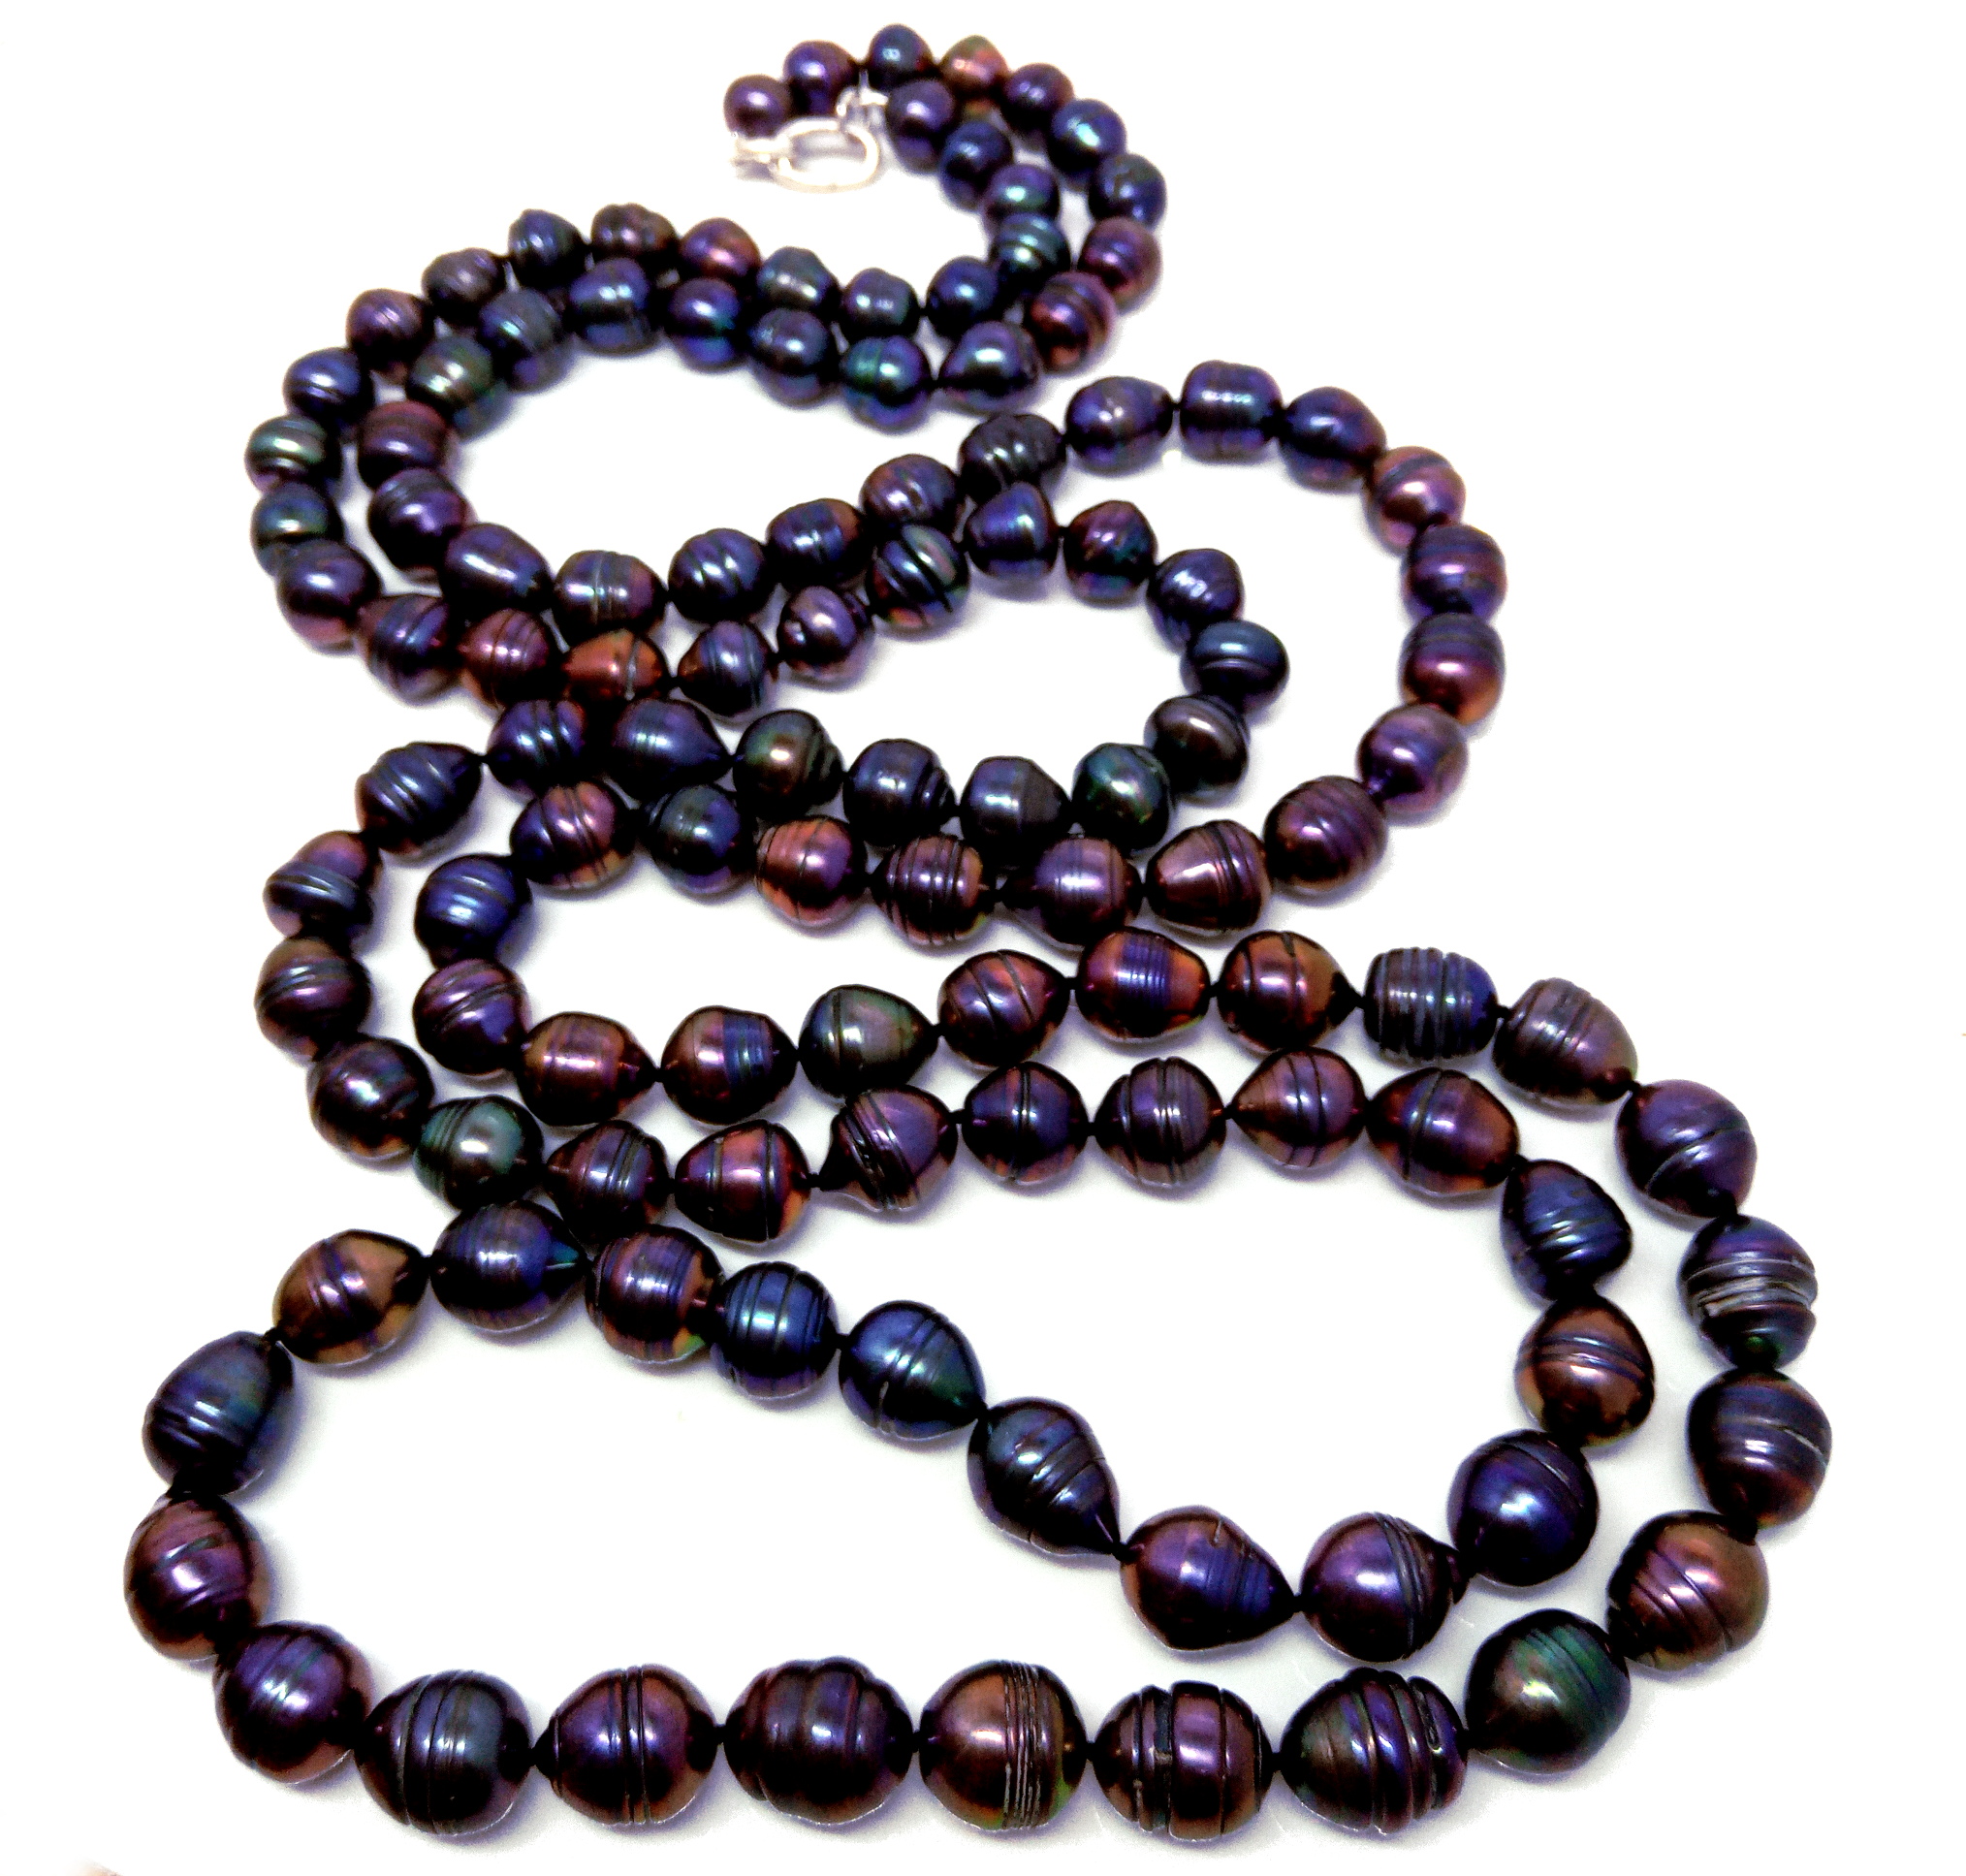 Ringed Black Drop Pearls Long Necklace